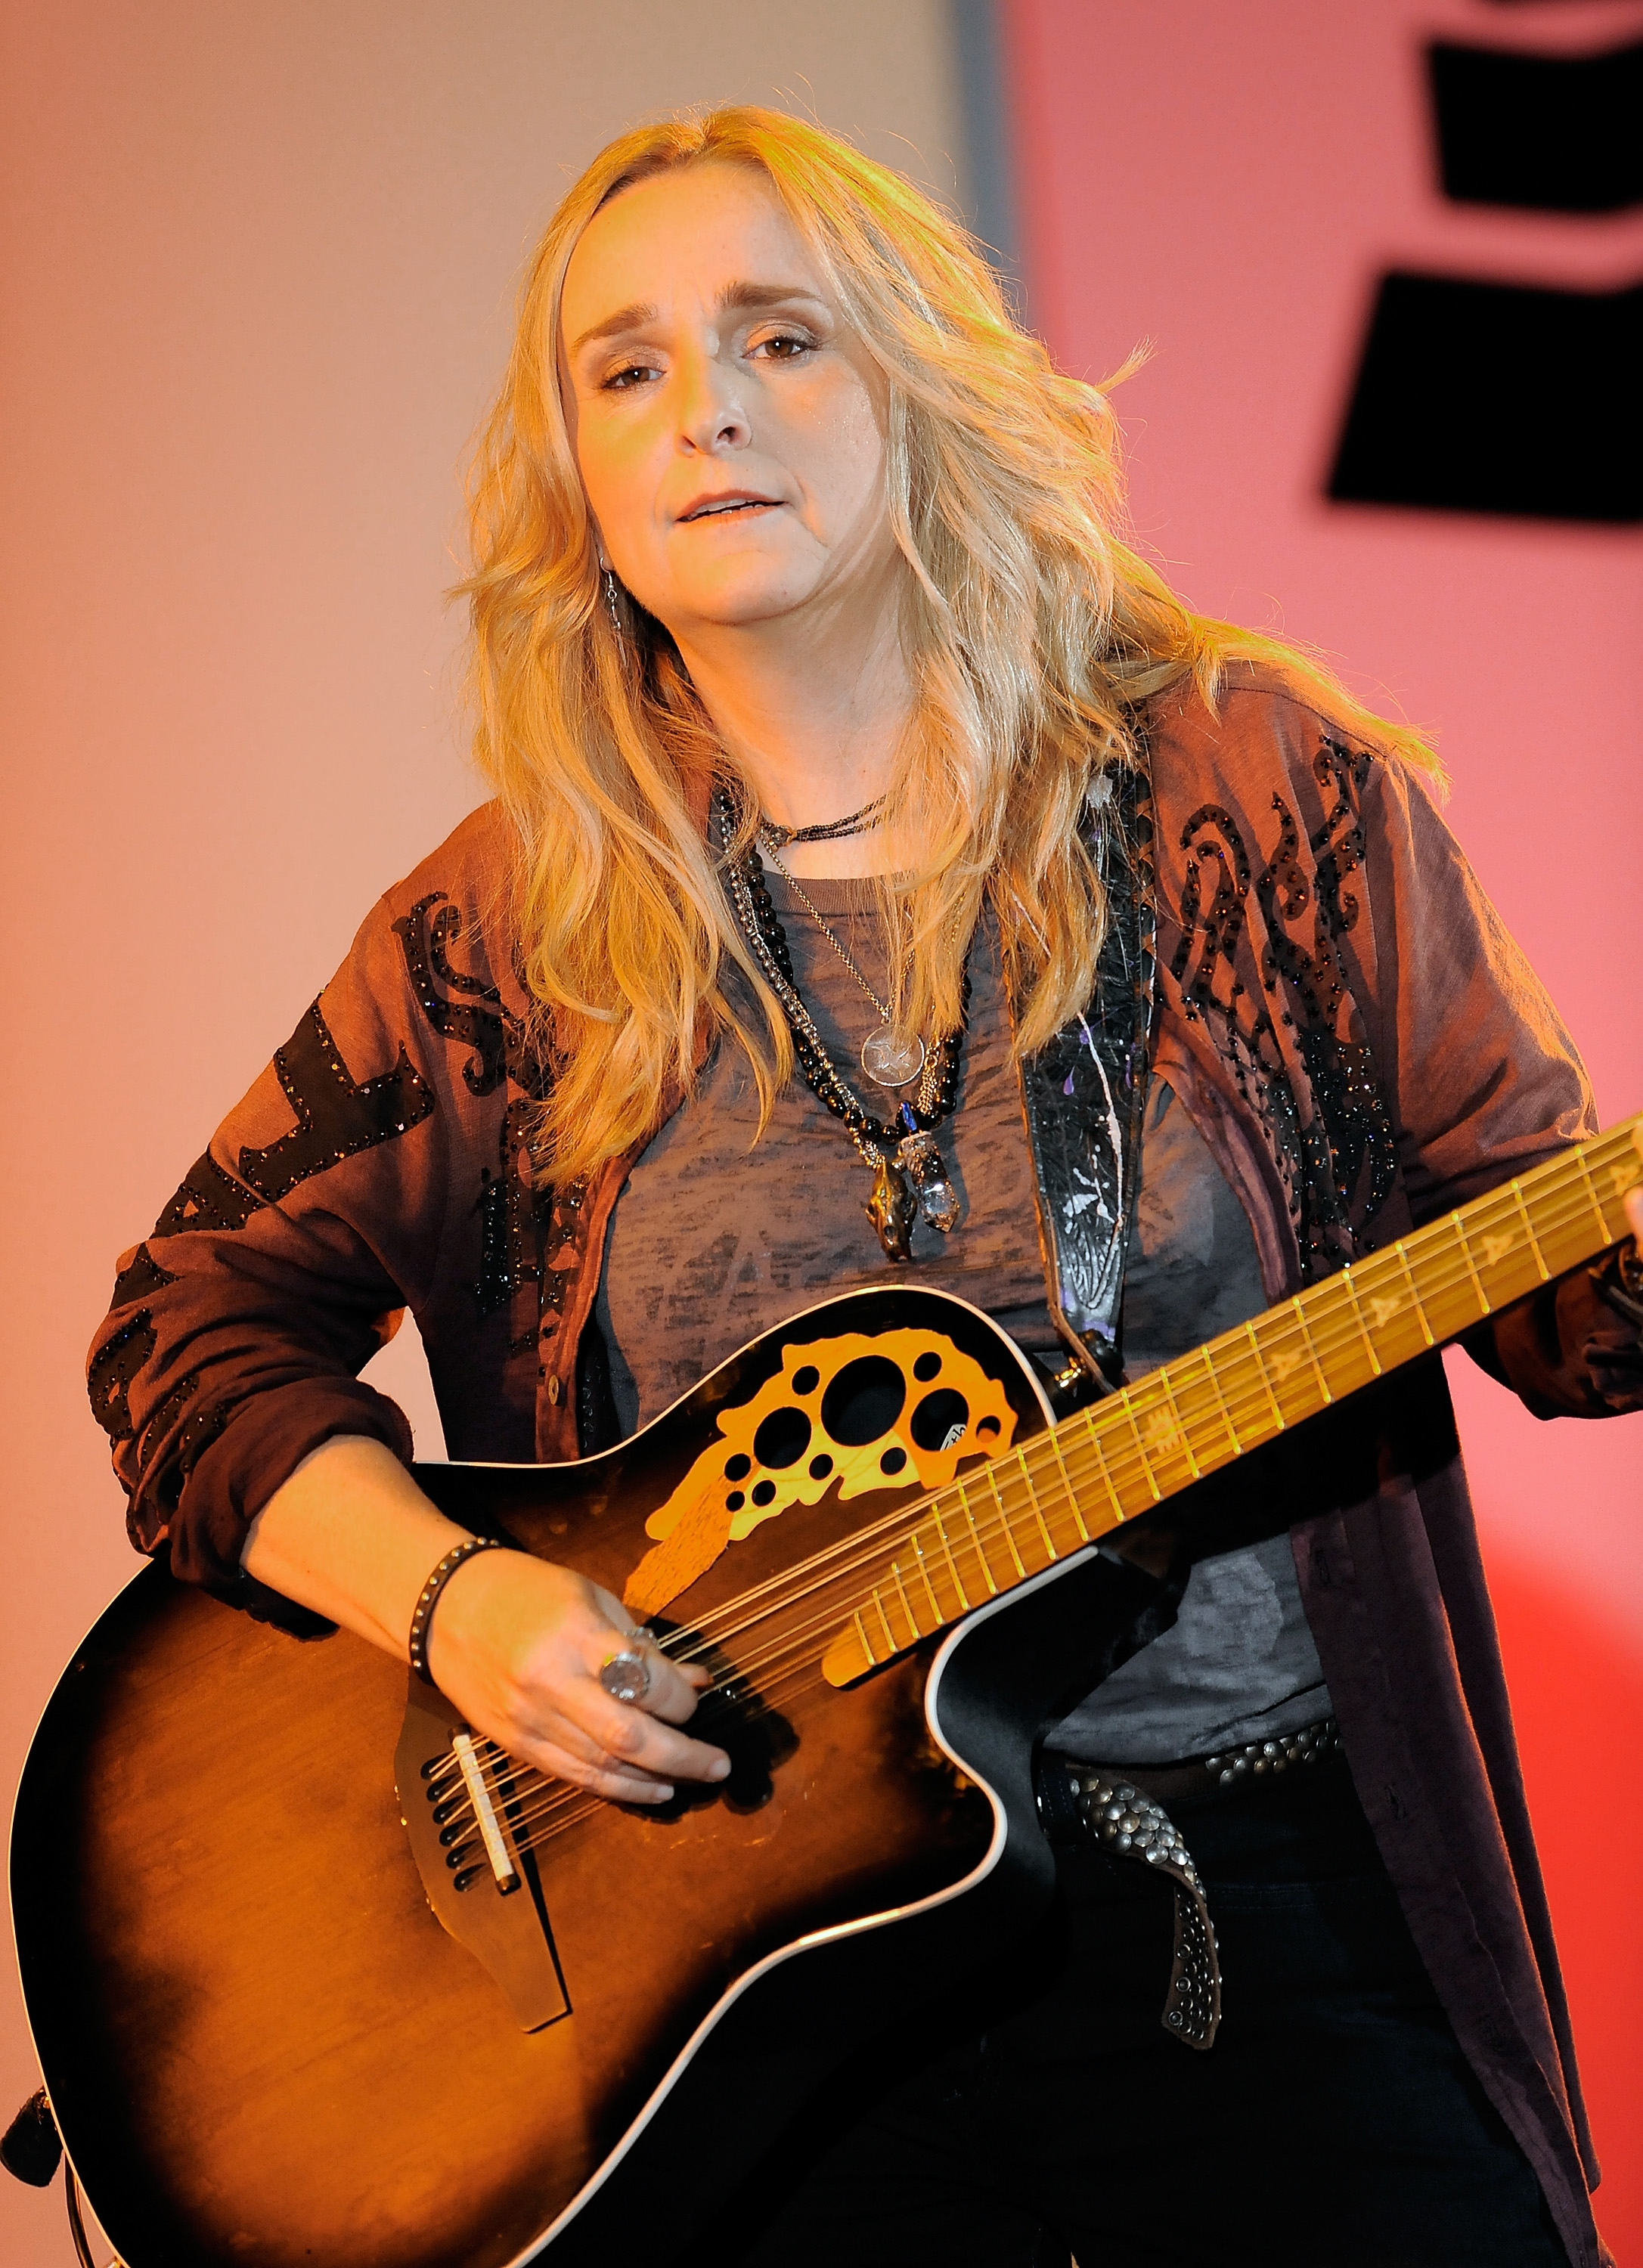 Melissa Etheridge performs in concert during The Recording Academy's Grammy Artists Revealed event at Hard Rock Cafe - Times Square in New York City on June 21, 2010. | Source: Getty Images